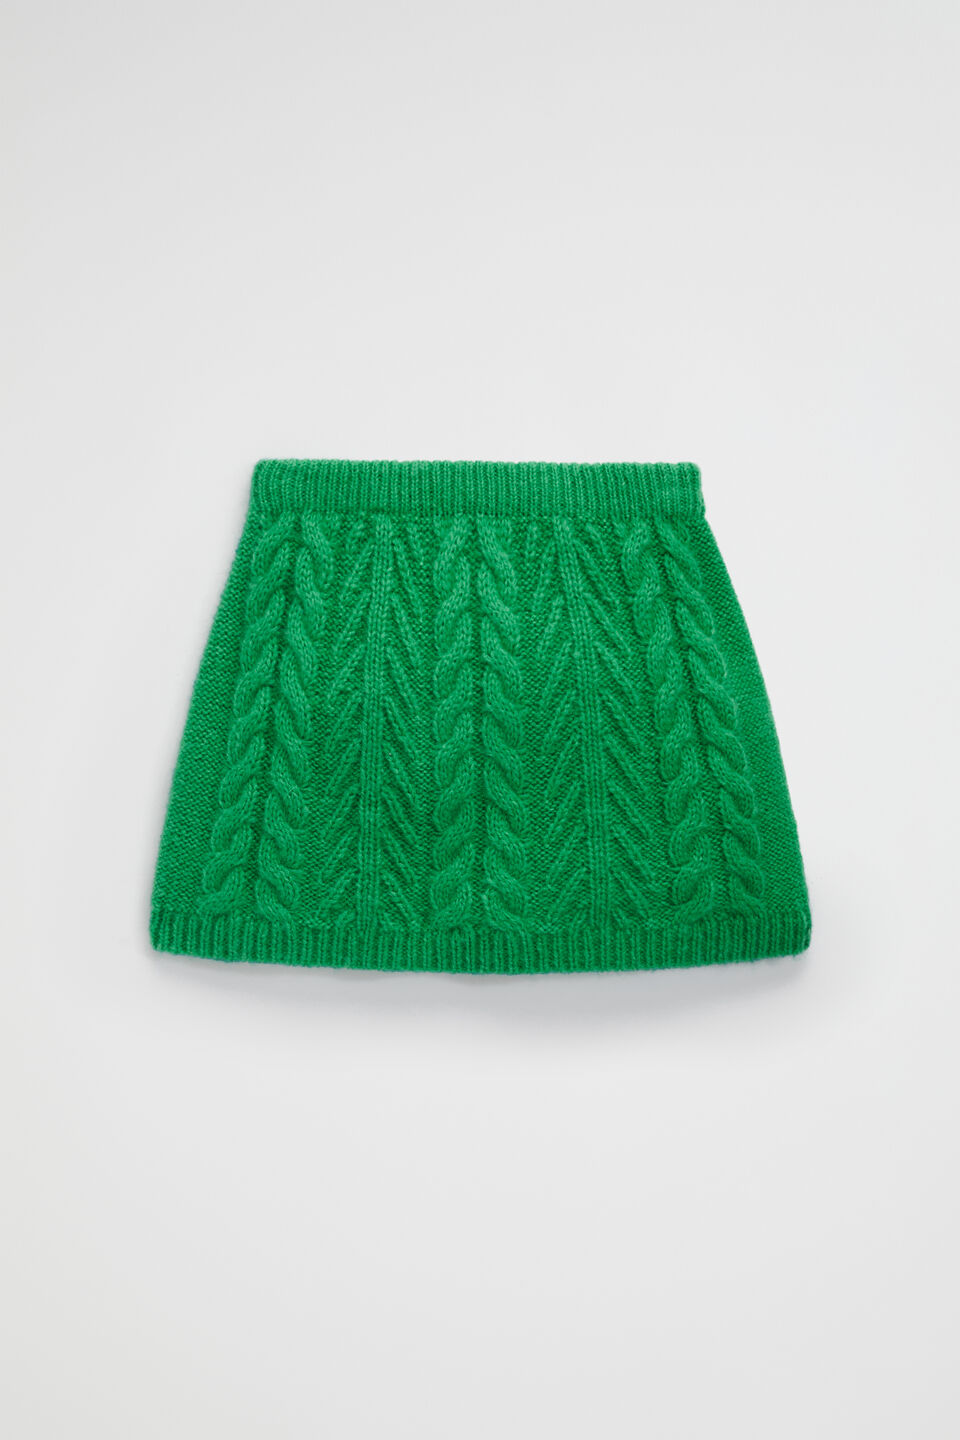 Linear Knit Cable Skirt  Pea Green